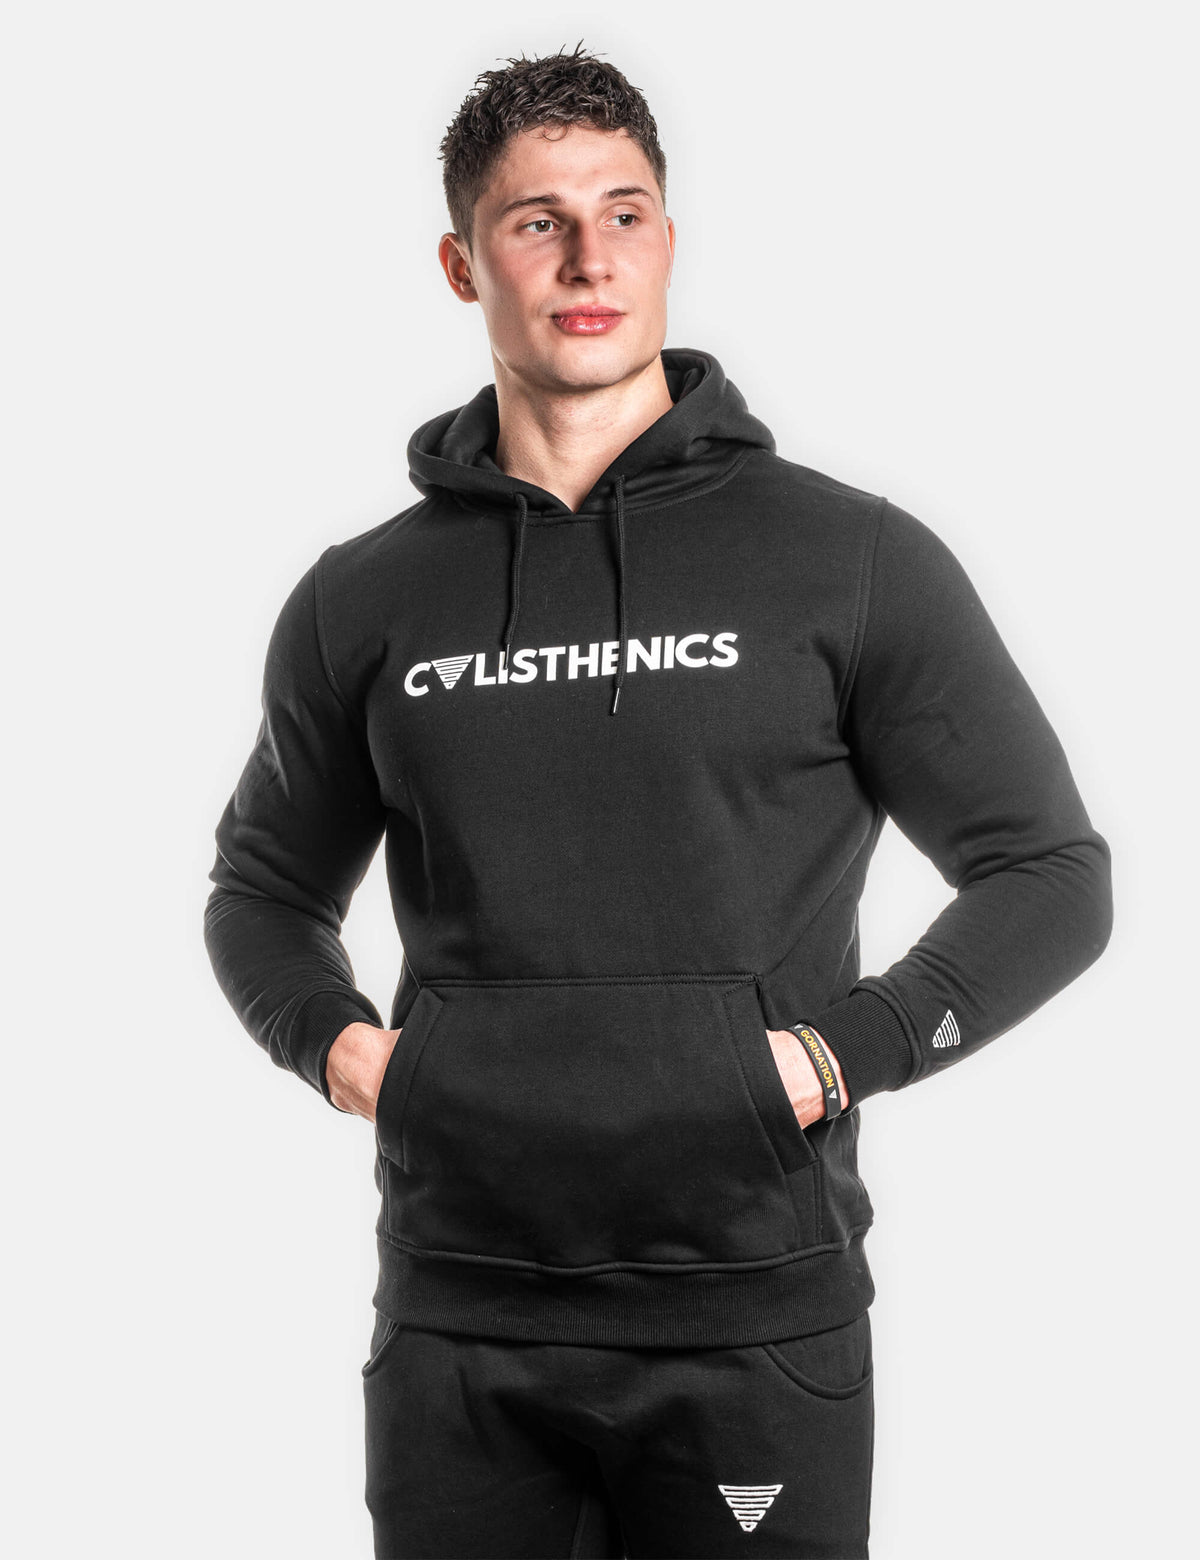 Front view of the Calisthenics hoodie from Gornation and skinny sweatpants presenting the Calisthenics text and Gornation logo.